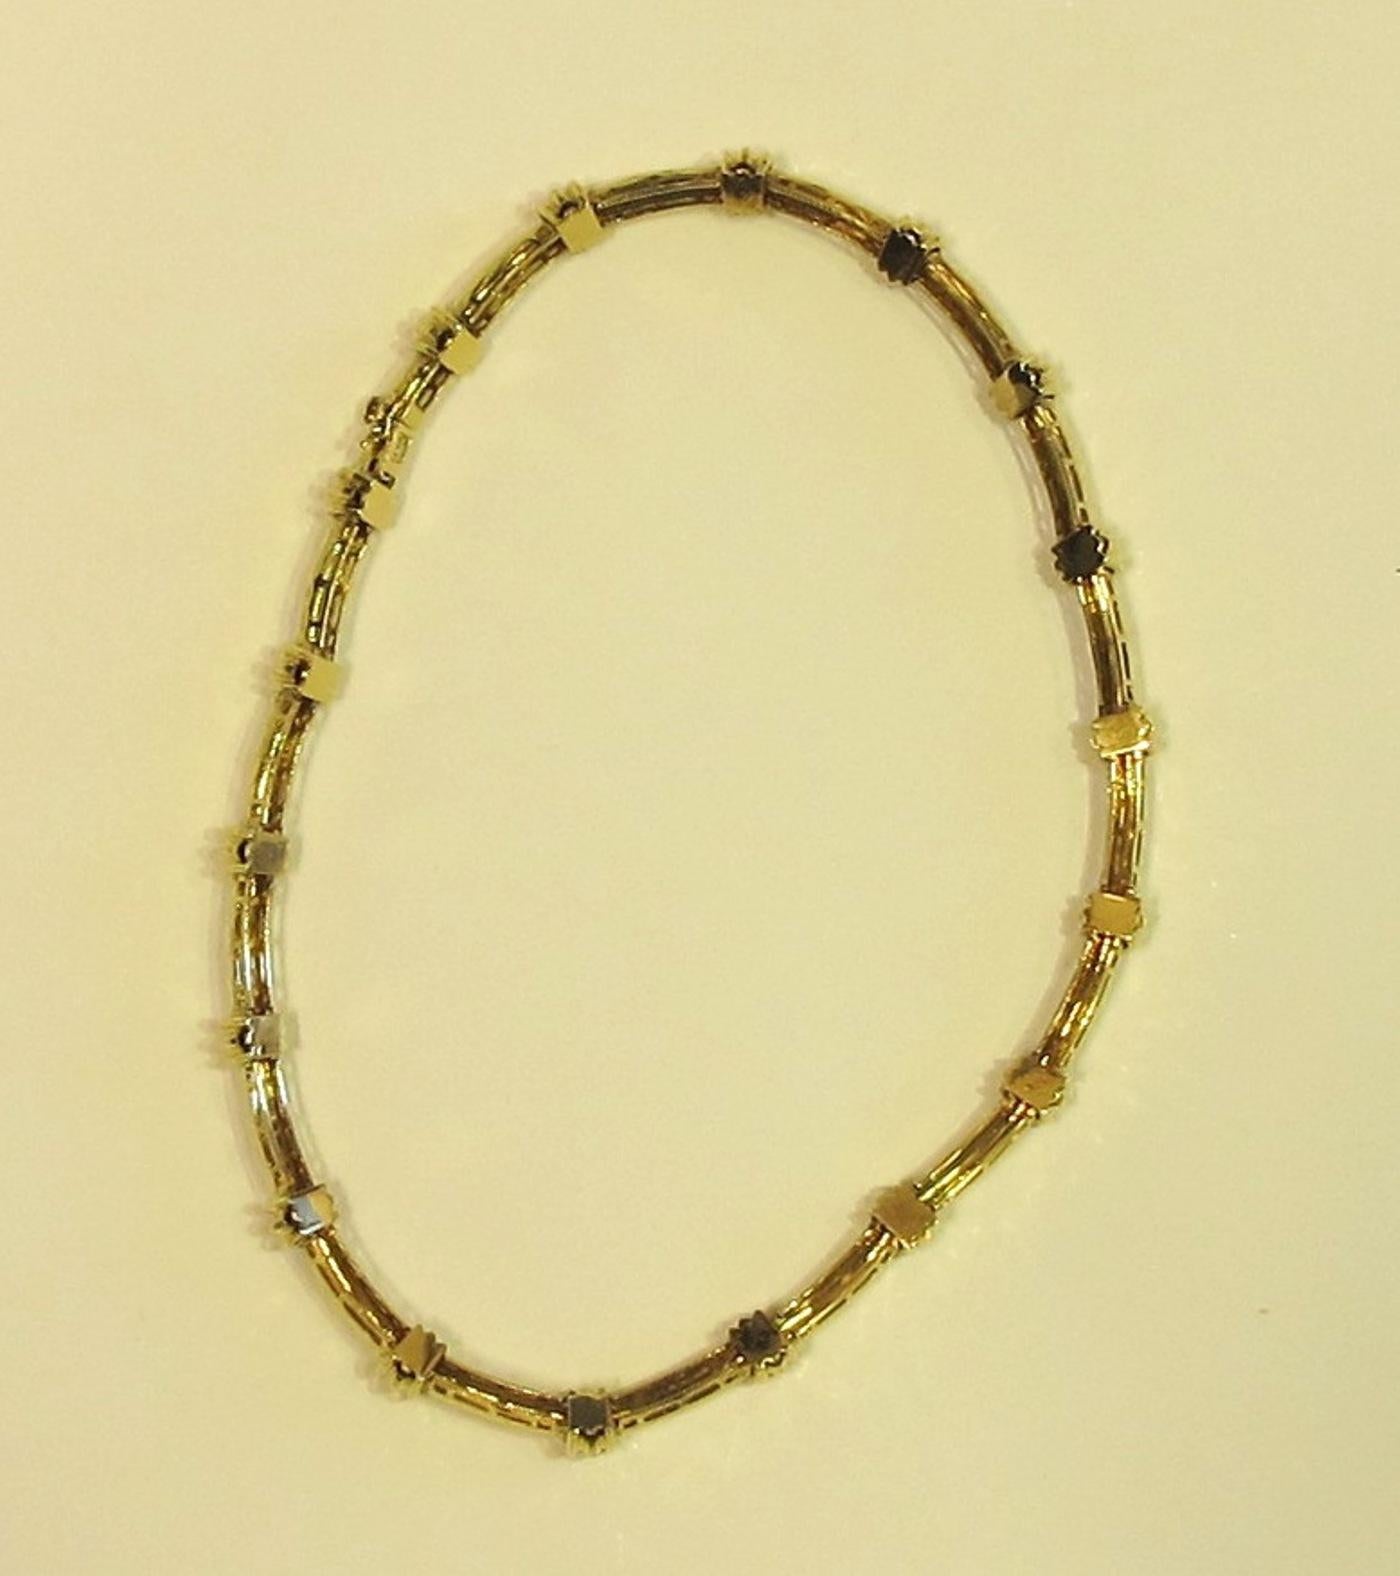 Signed by Henry Dunay.  18 Karat yellow gold notched necklace. 68 grams in weight.  15 inches in length.